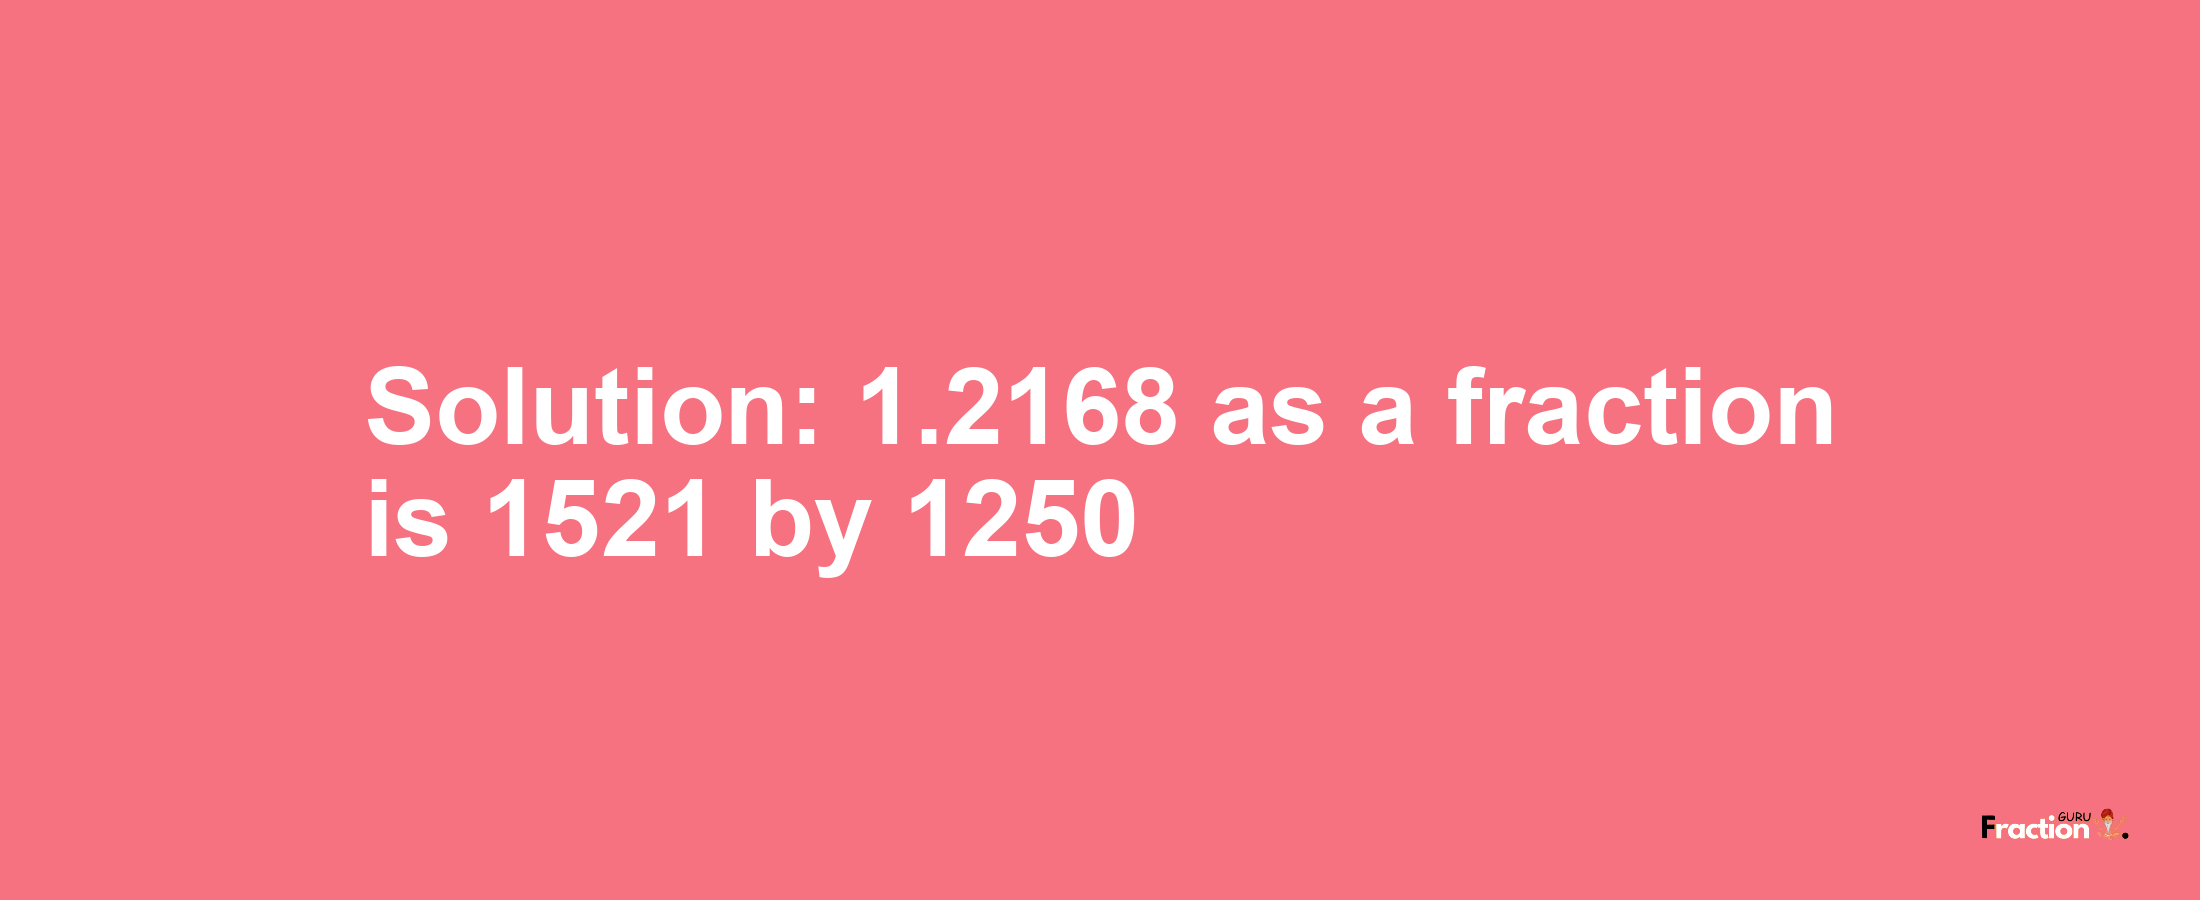 Solution:1.2168 as a fraction is 1521/1250